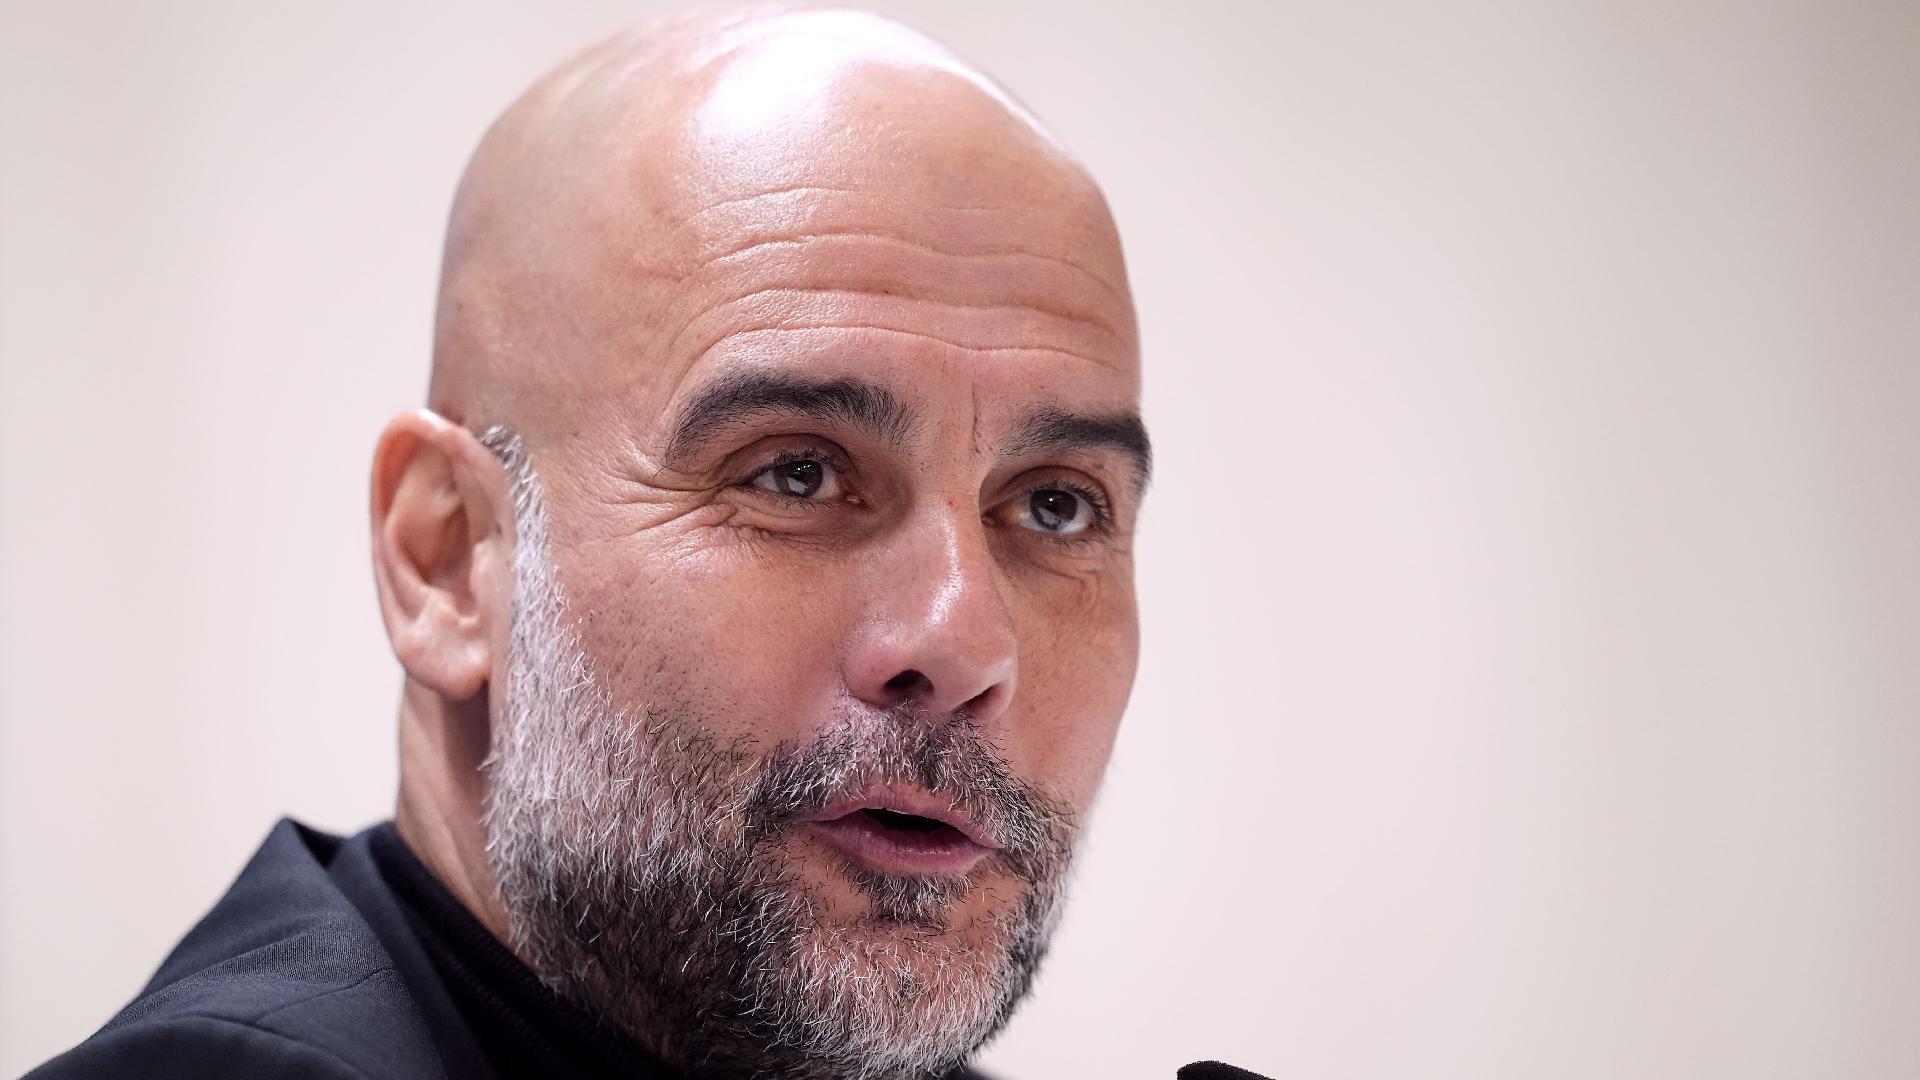 We have to punish them – Pep Guardiola calls on Man City to ‘hurt’ Real Madrid